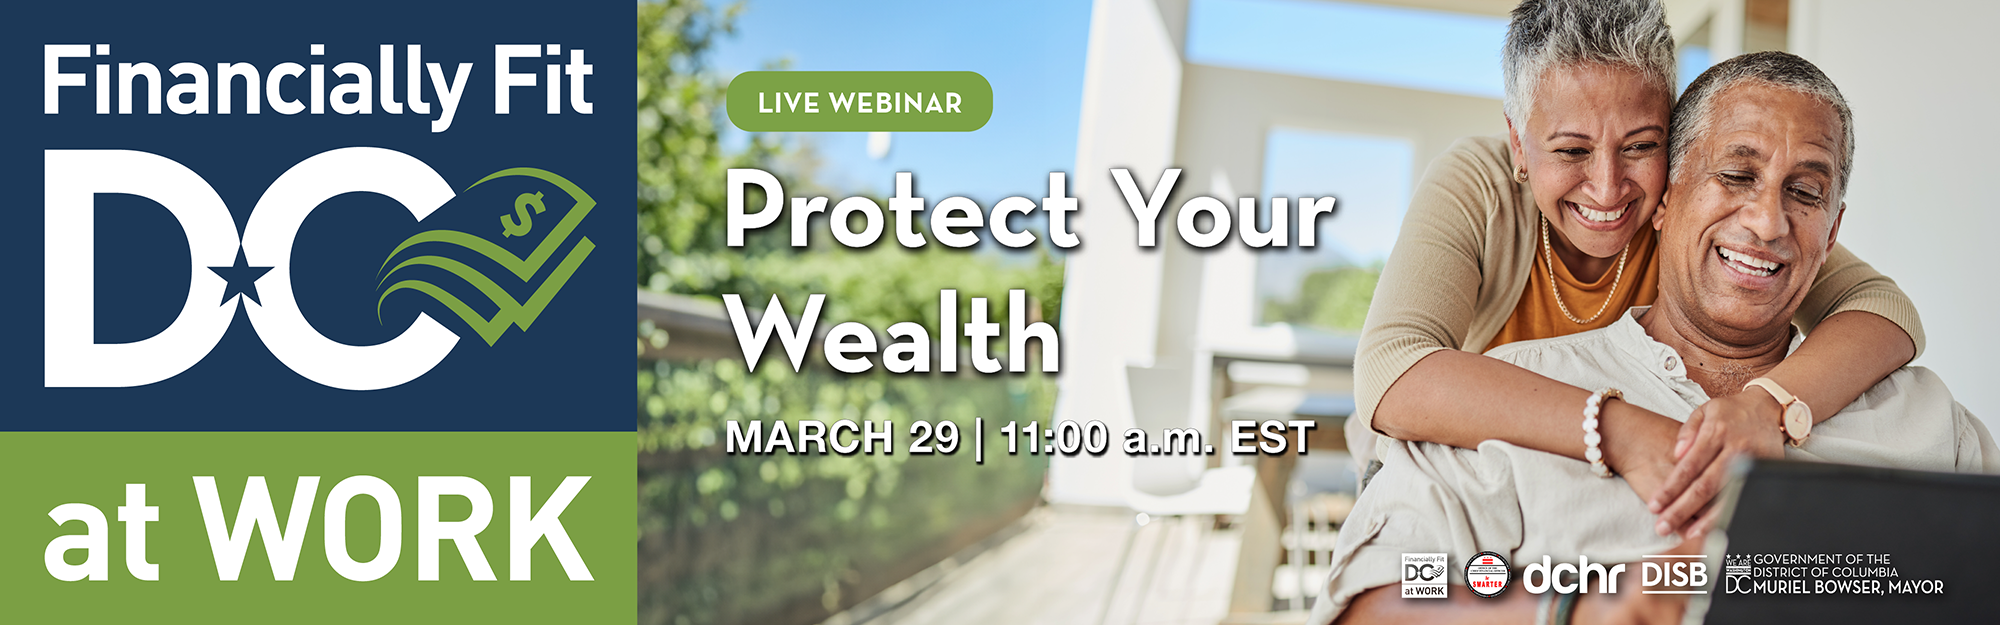 Financially Fit DC at Work Presents: Protect Your Wealth